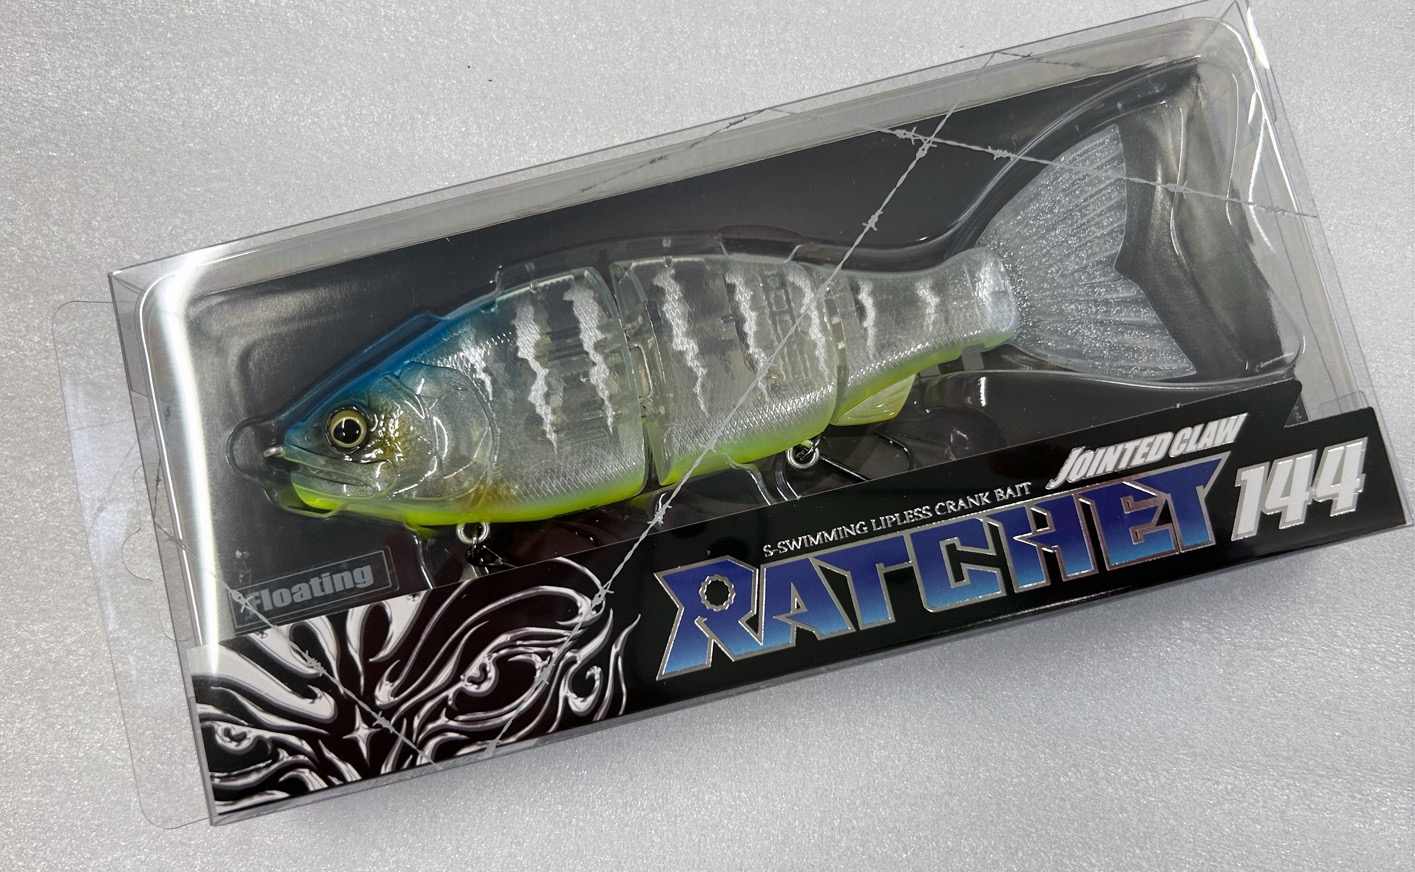 JOINTED CLAW RATCHET 144 Blue Back Clear Perch